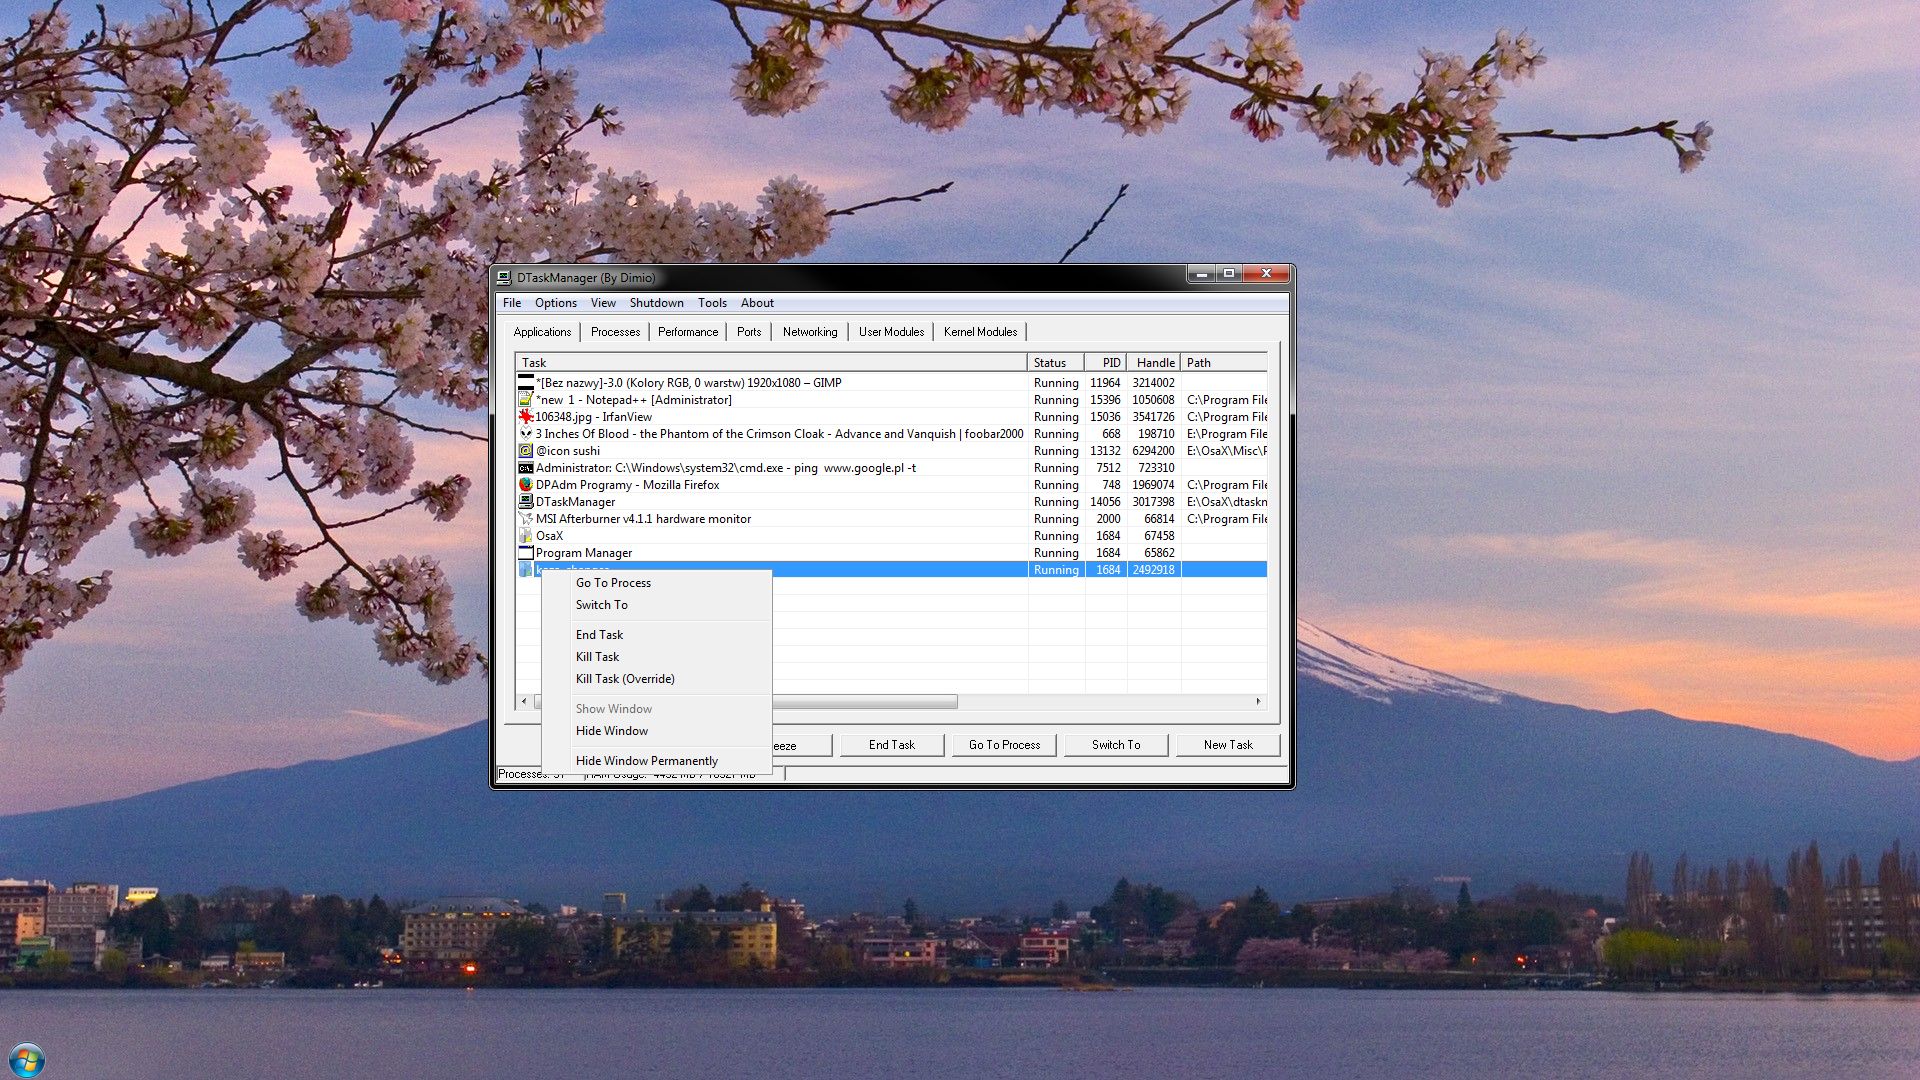 download the new DTaskManager 1.57.31